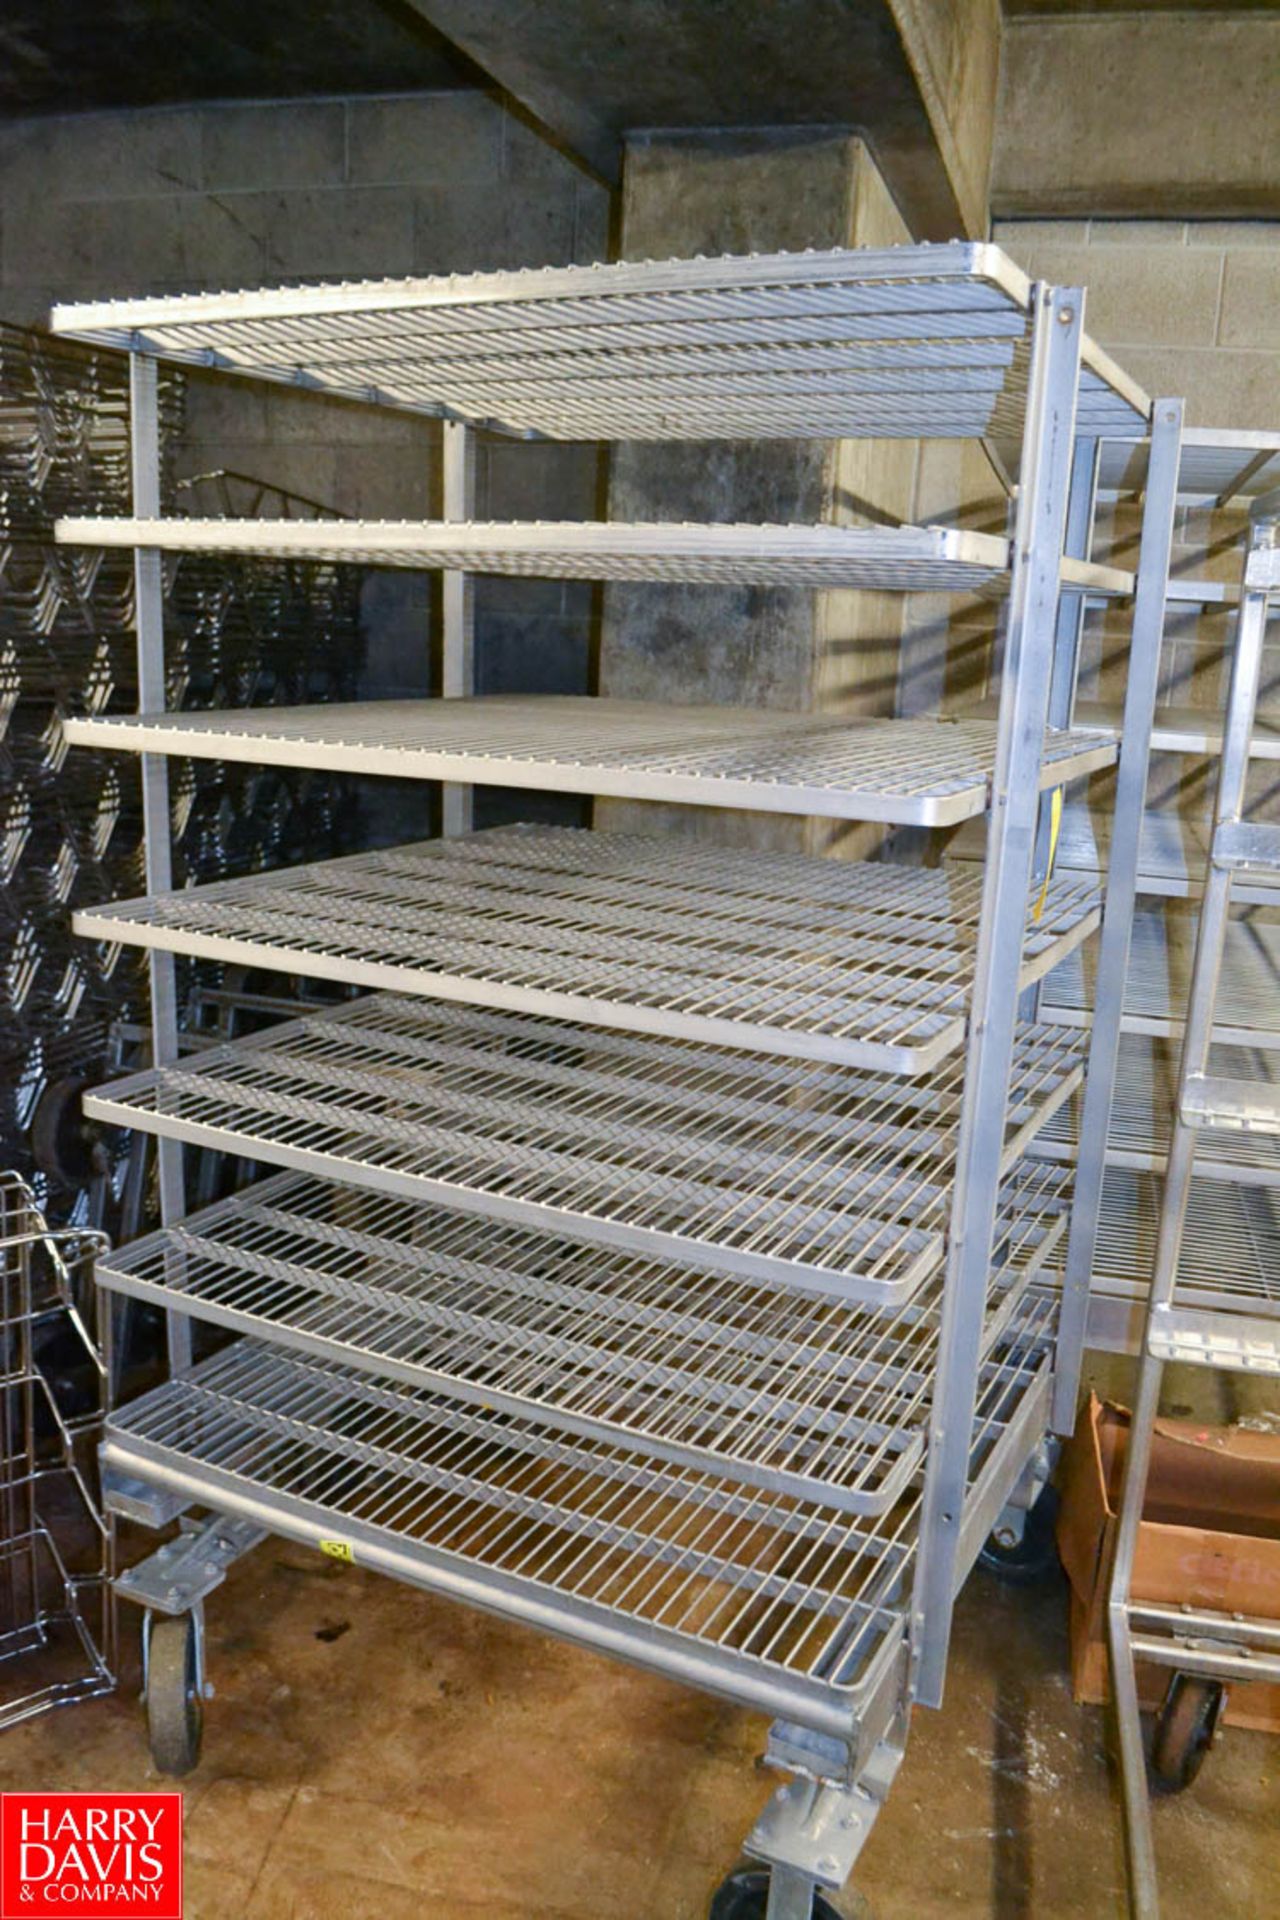 S/S Rack on Casters with S/S Wire Shelves